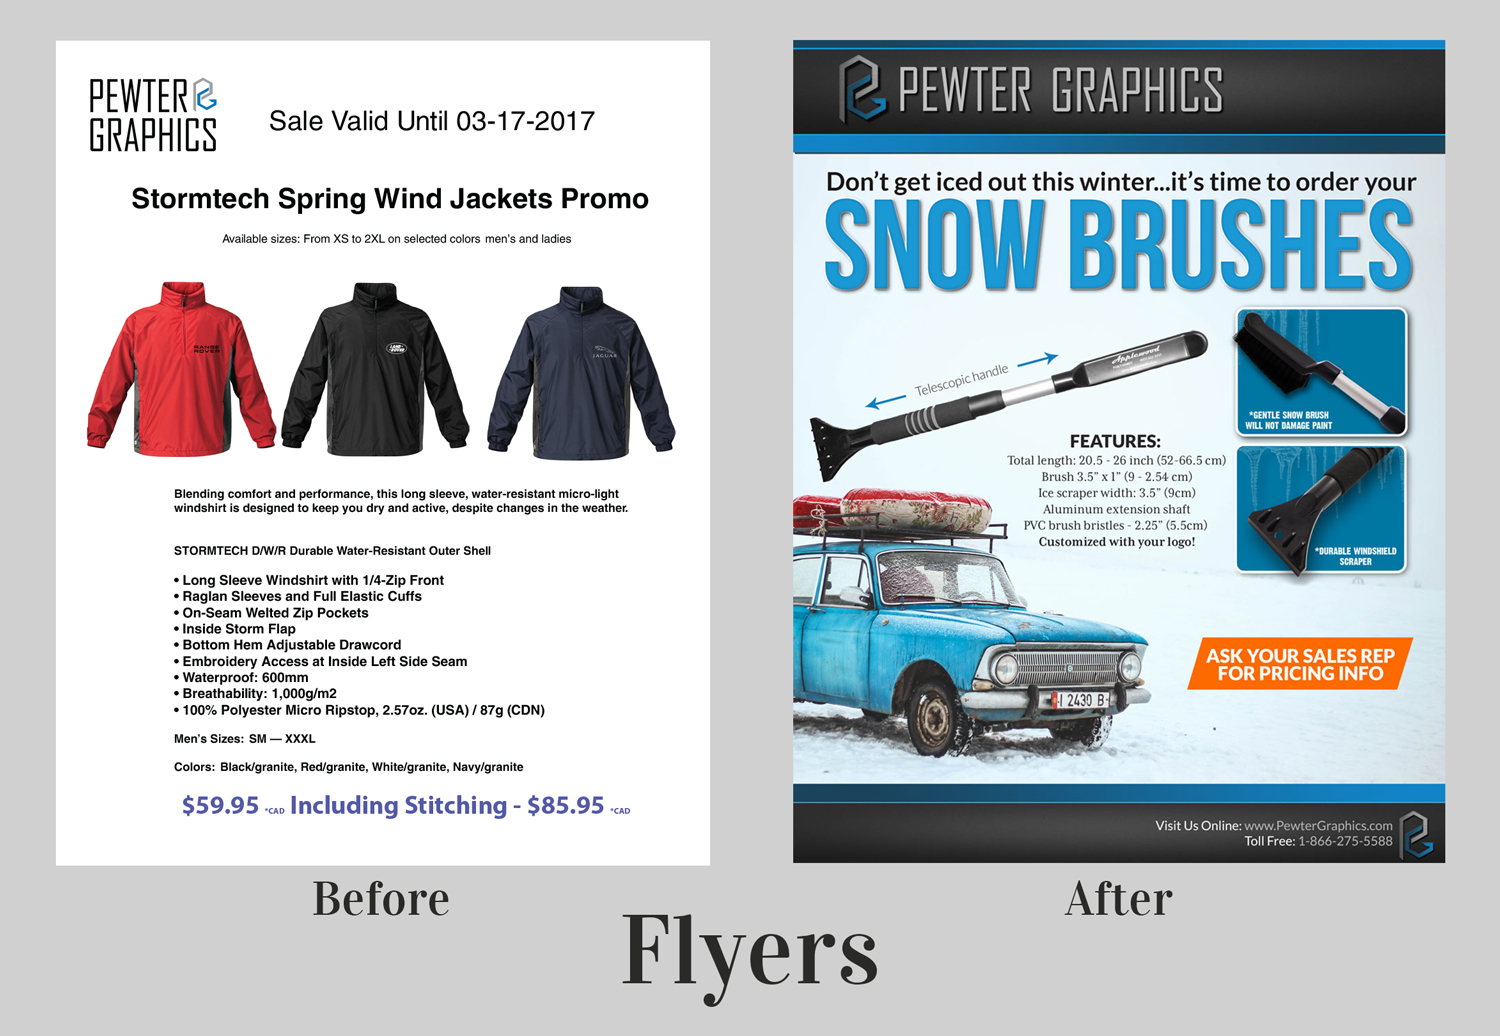 Flyers before & after